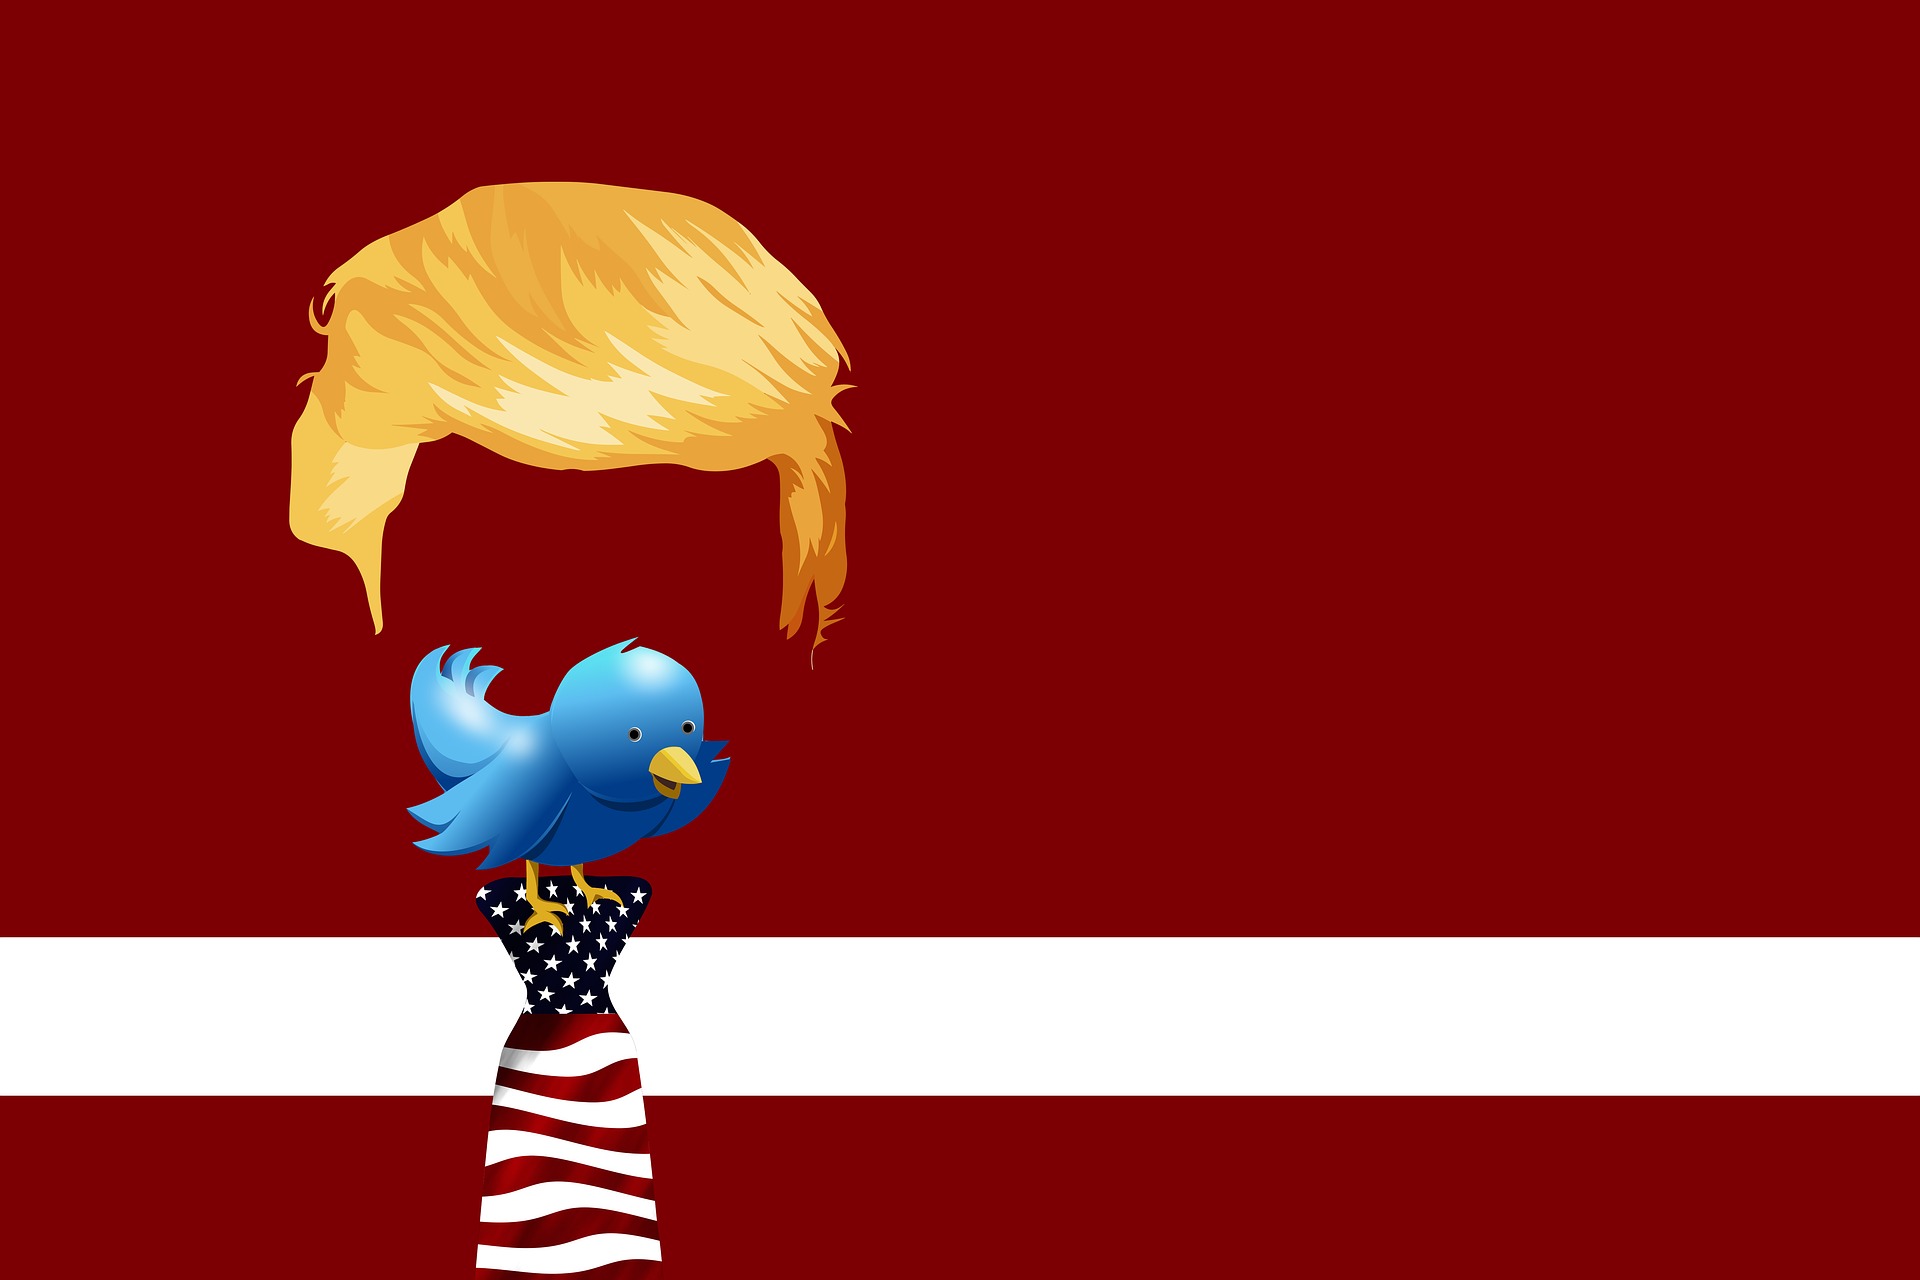 Law_ blog on USA elections Trump Twitter 